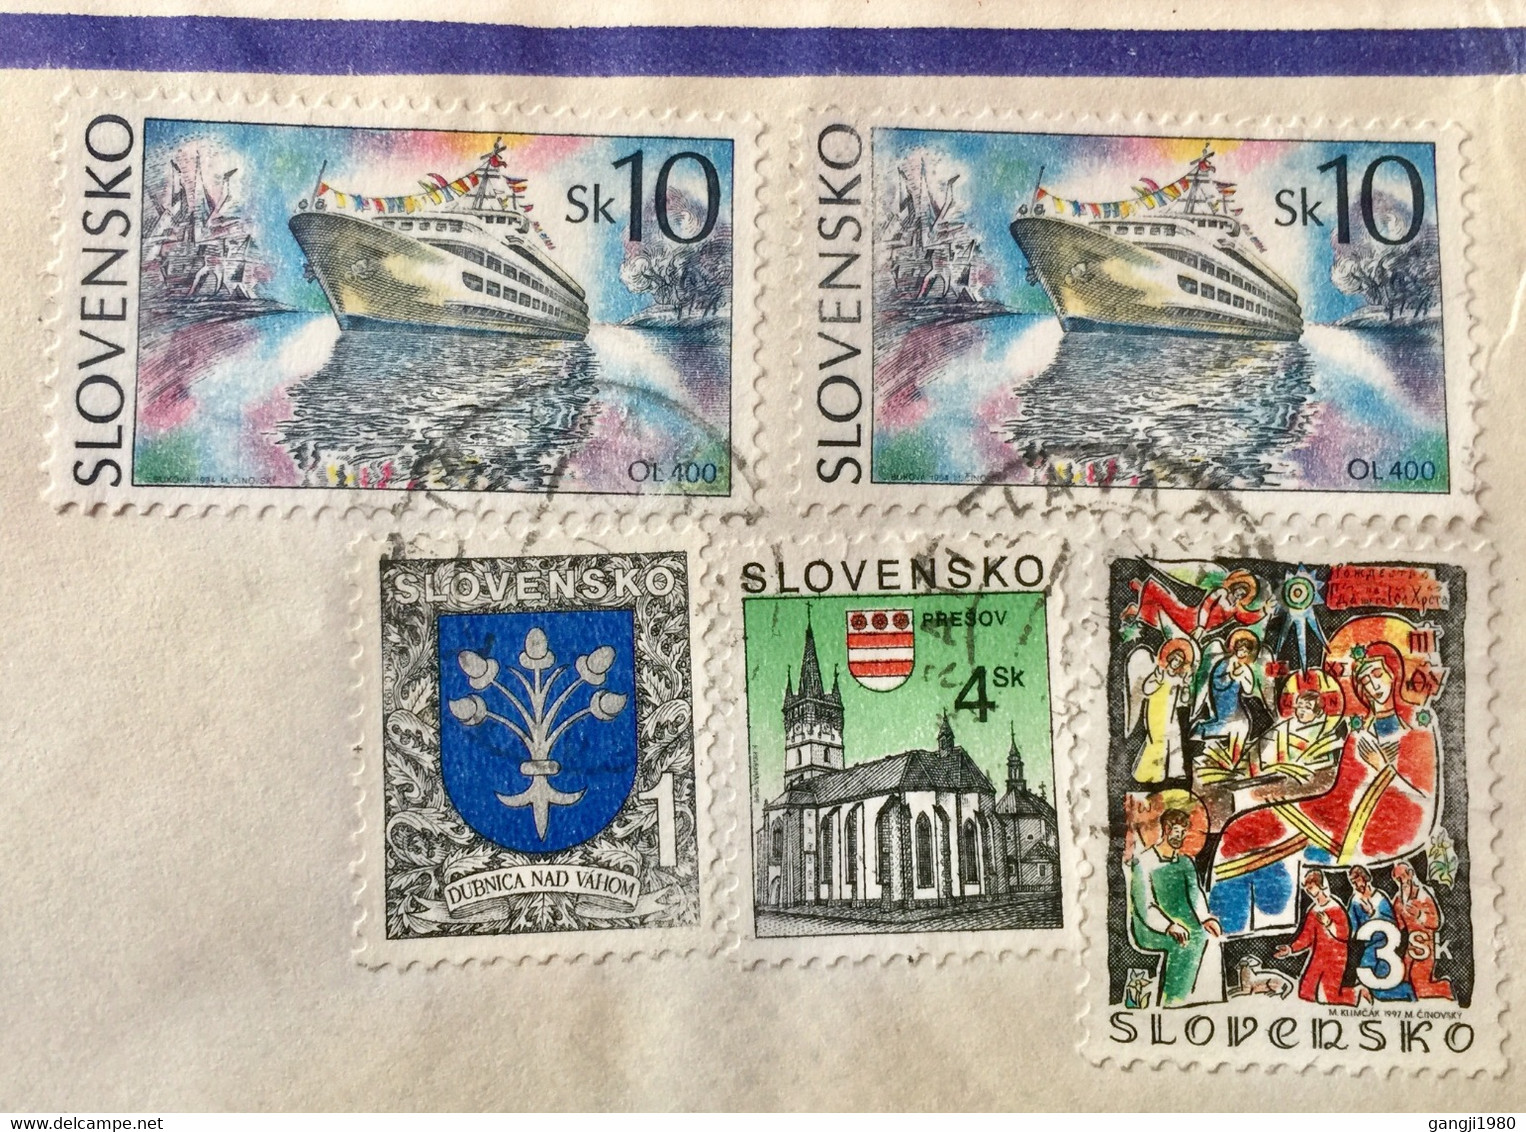 SLOVAKIA 2005, USED AIRMAIL COVER TO INDIA ,5 STAMPS 38SK RATE !SHIP, PRESOV,BUILDING,CHURCH,FAIRYTALES,ART ,PAINTING - Lettres & Documents